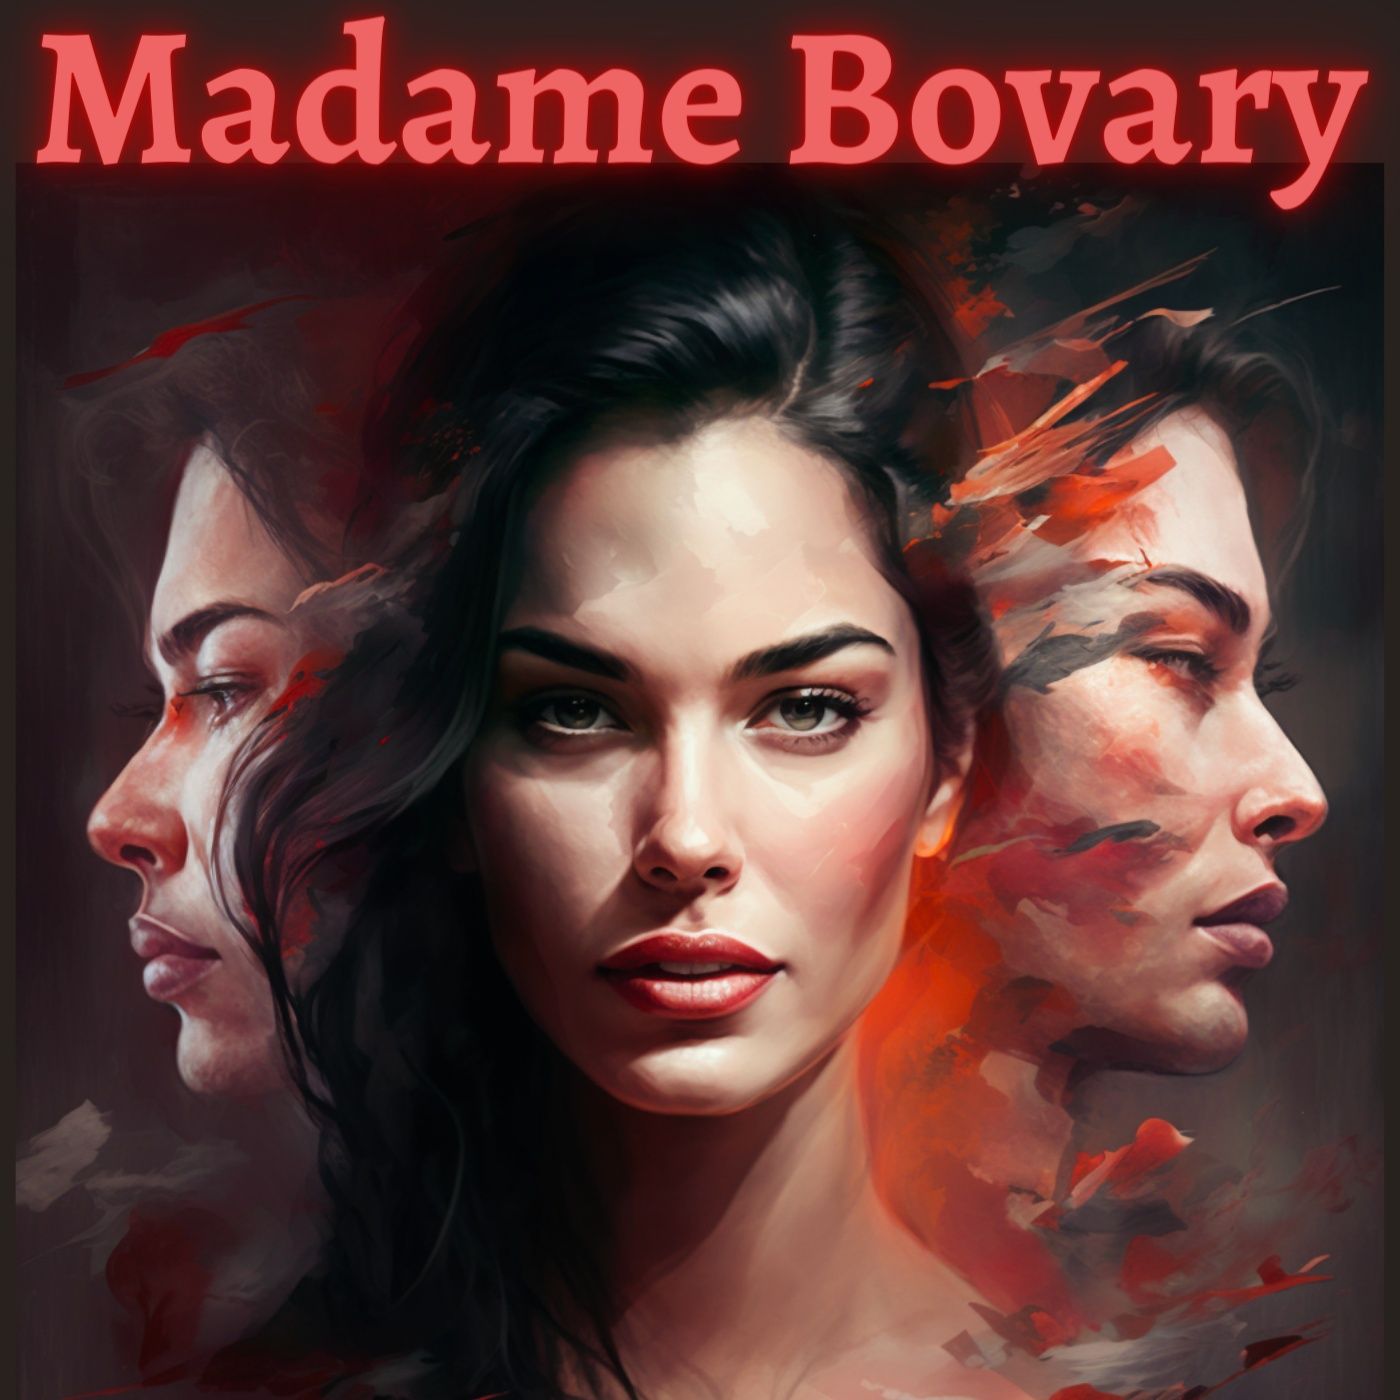 Episode 1 - Madame Bovary - Gustave Flaubert